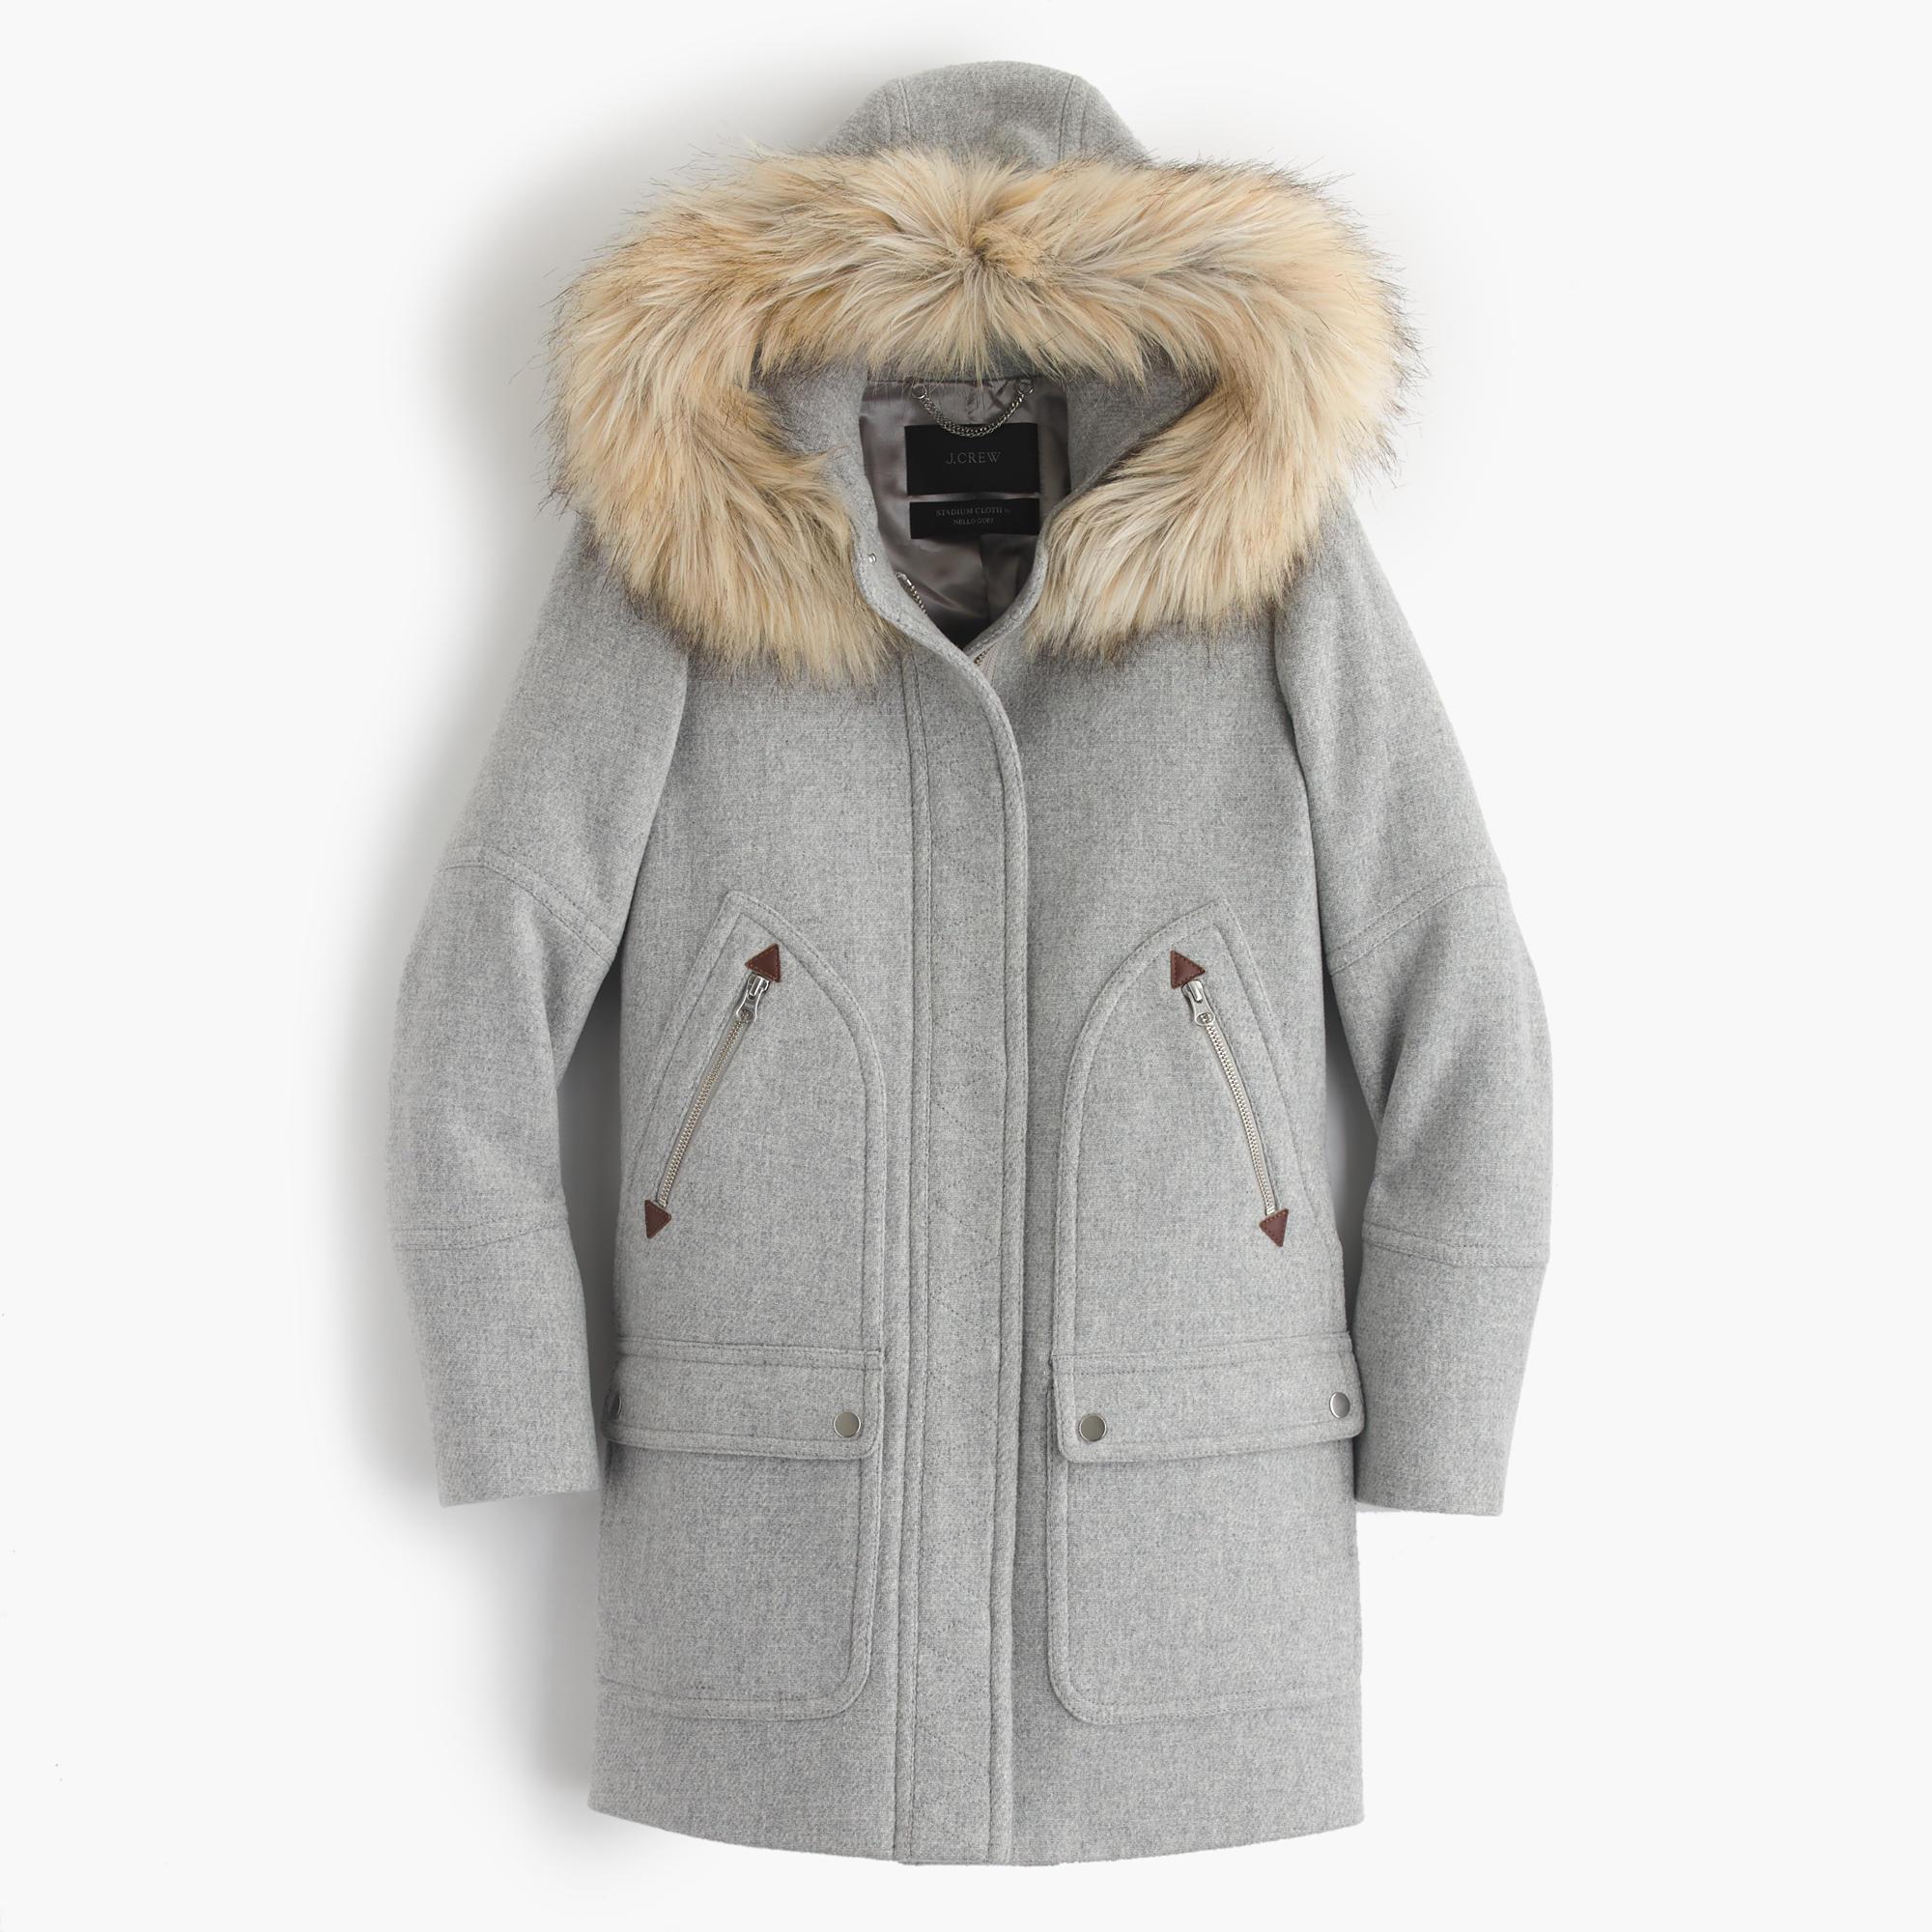 J.crew Tall Chateau Parka In Stadium-cloth in Gray | Lyst